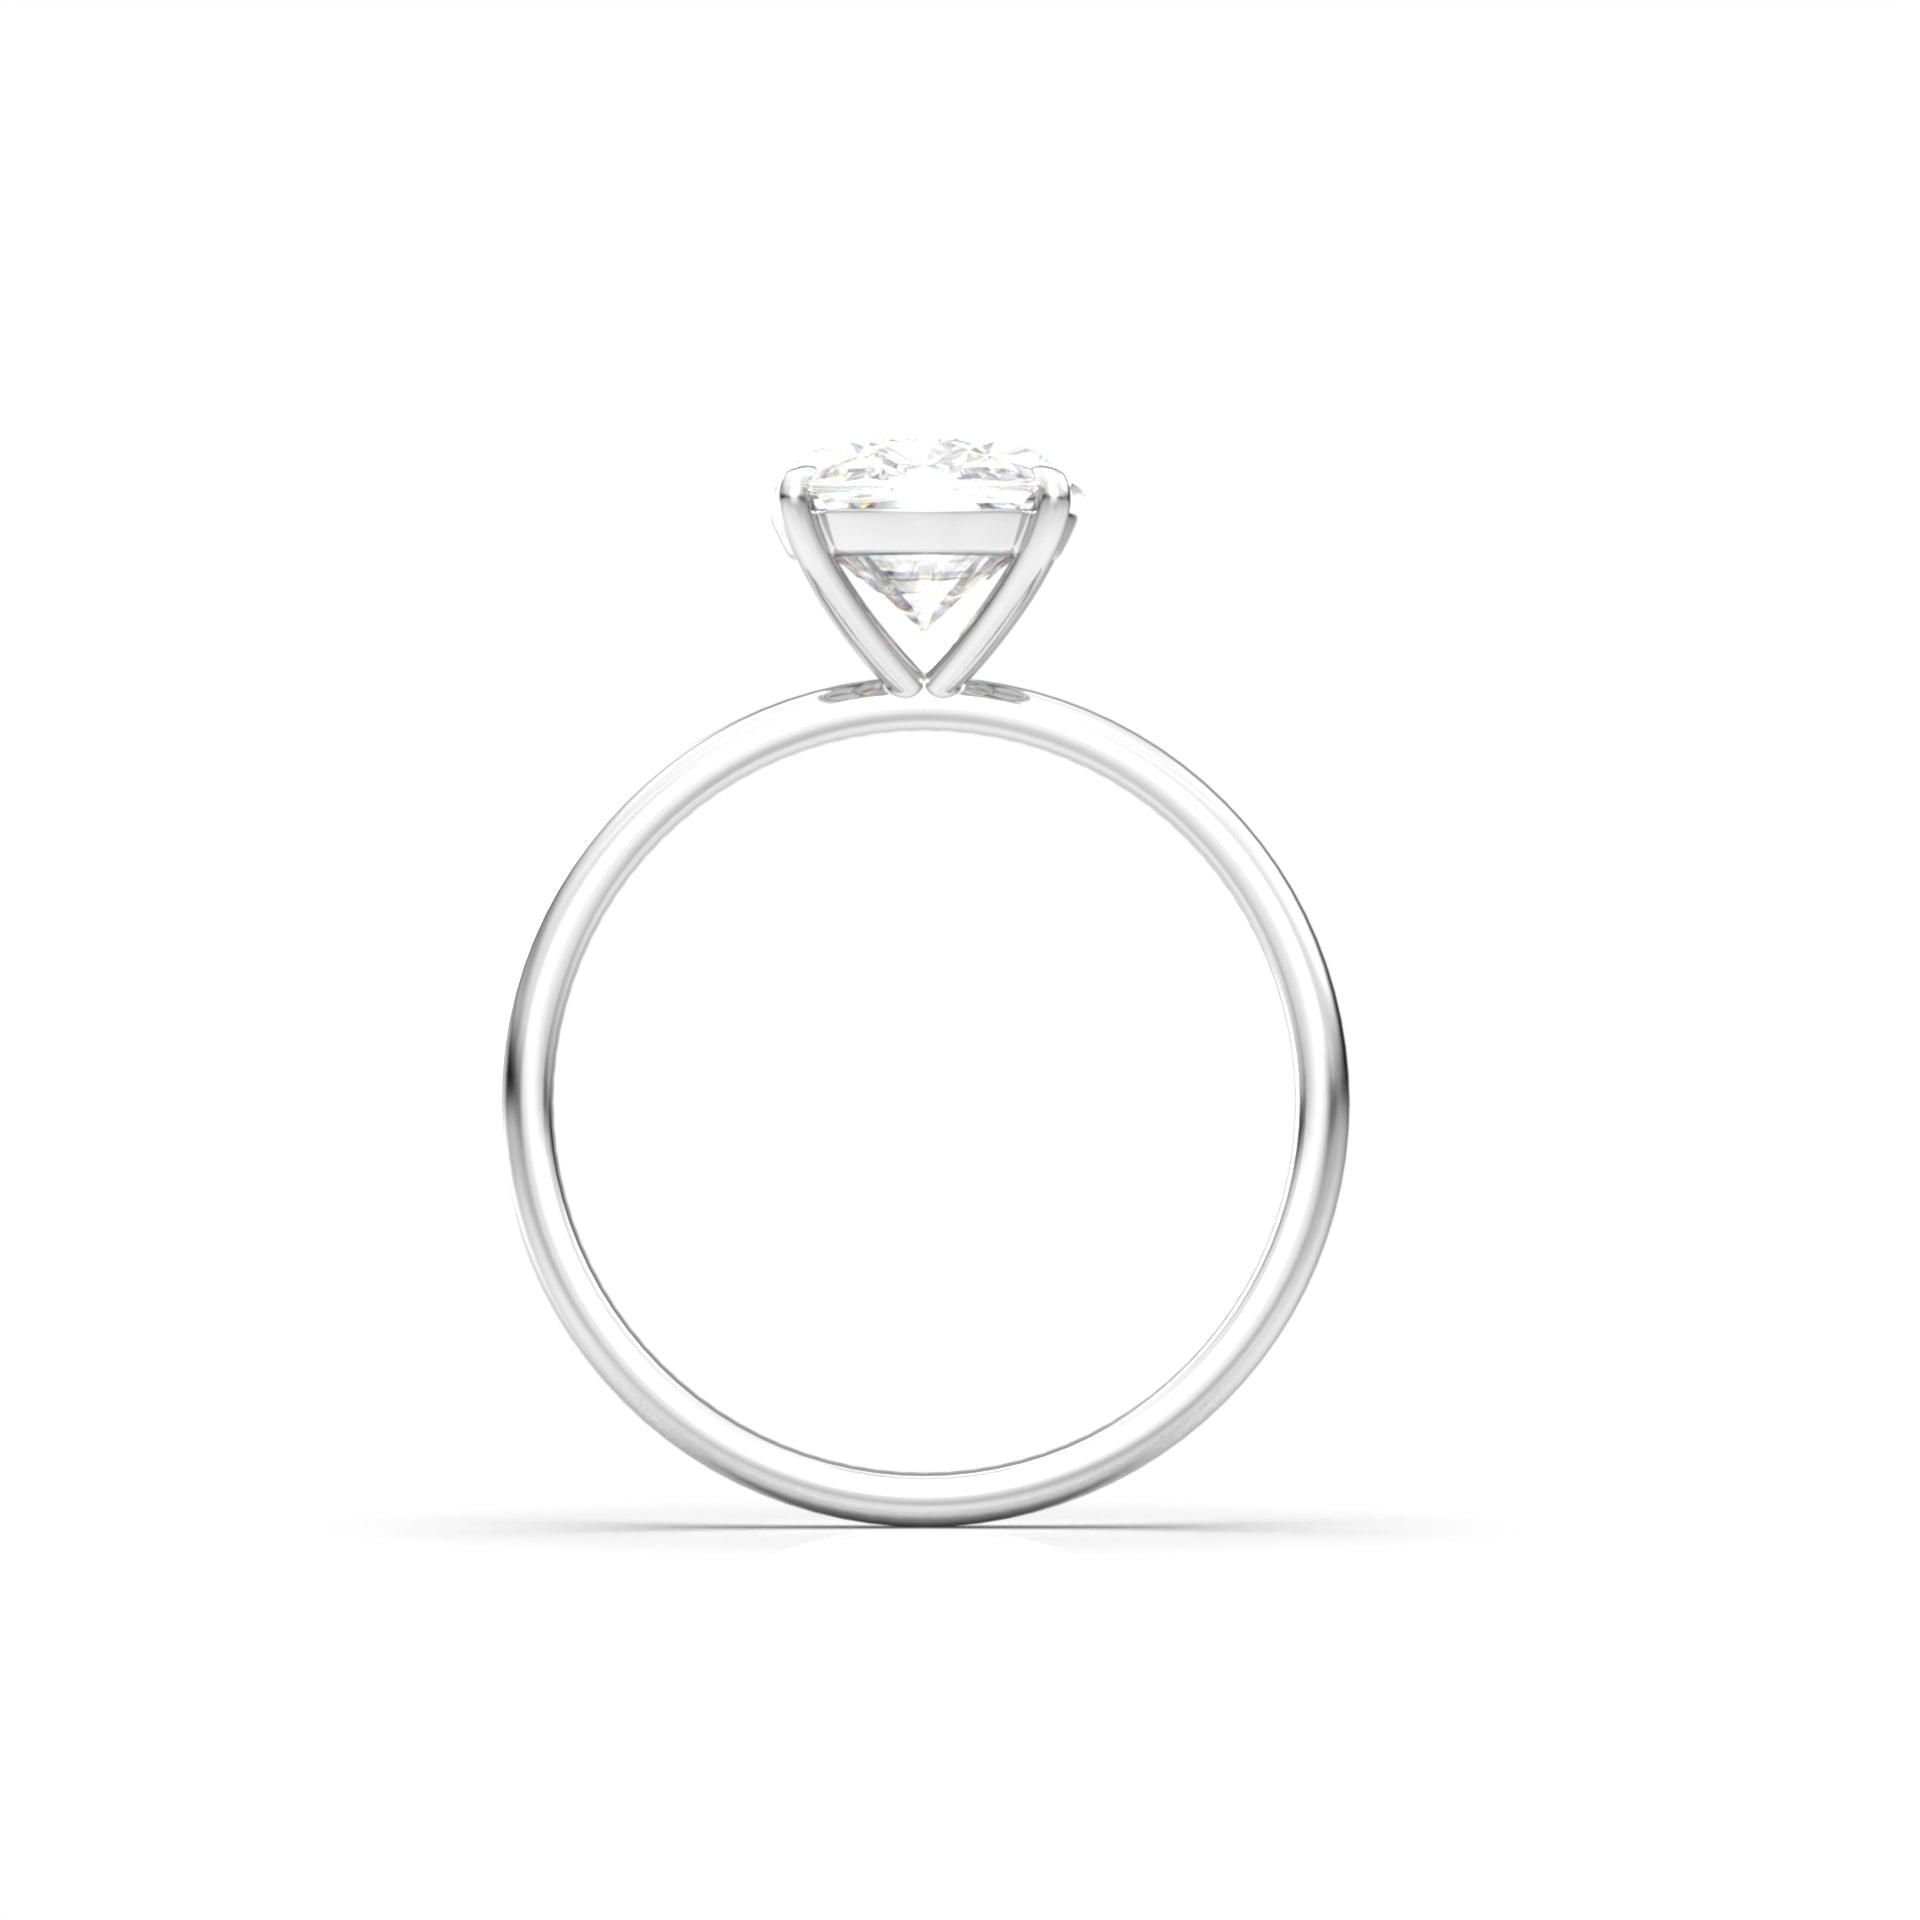 Elongated Cushion Cut 4 Claw Solitaire Ring Moissanite Engagement Ring - moissaniteengagementrings